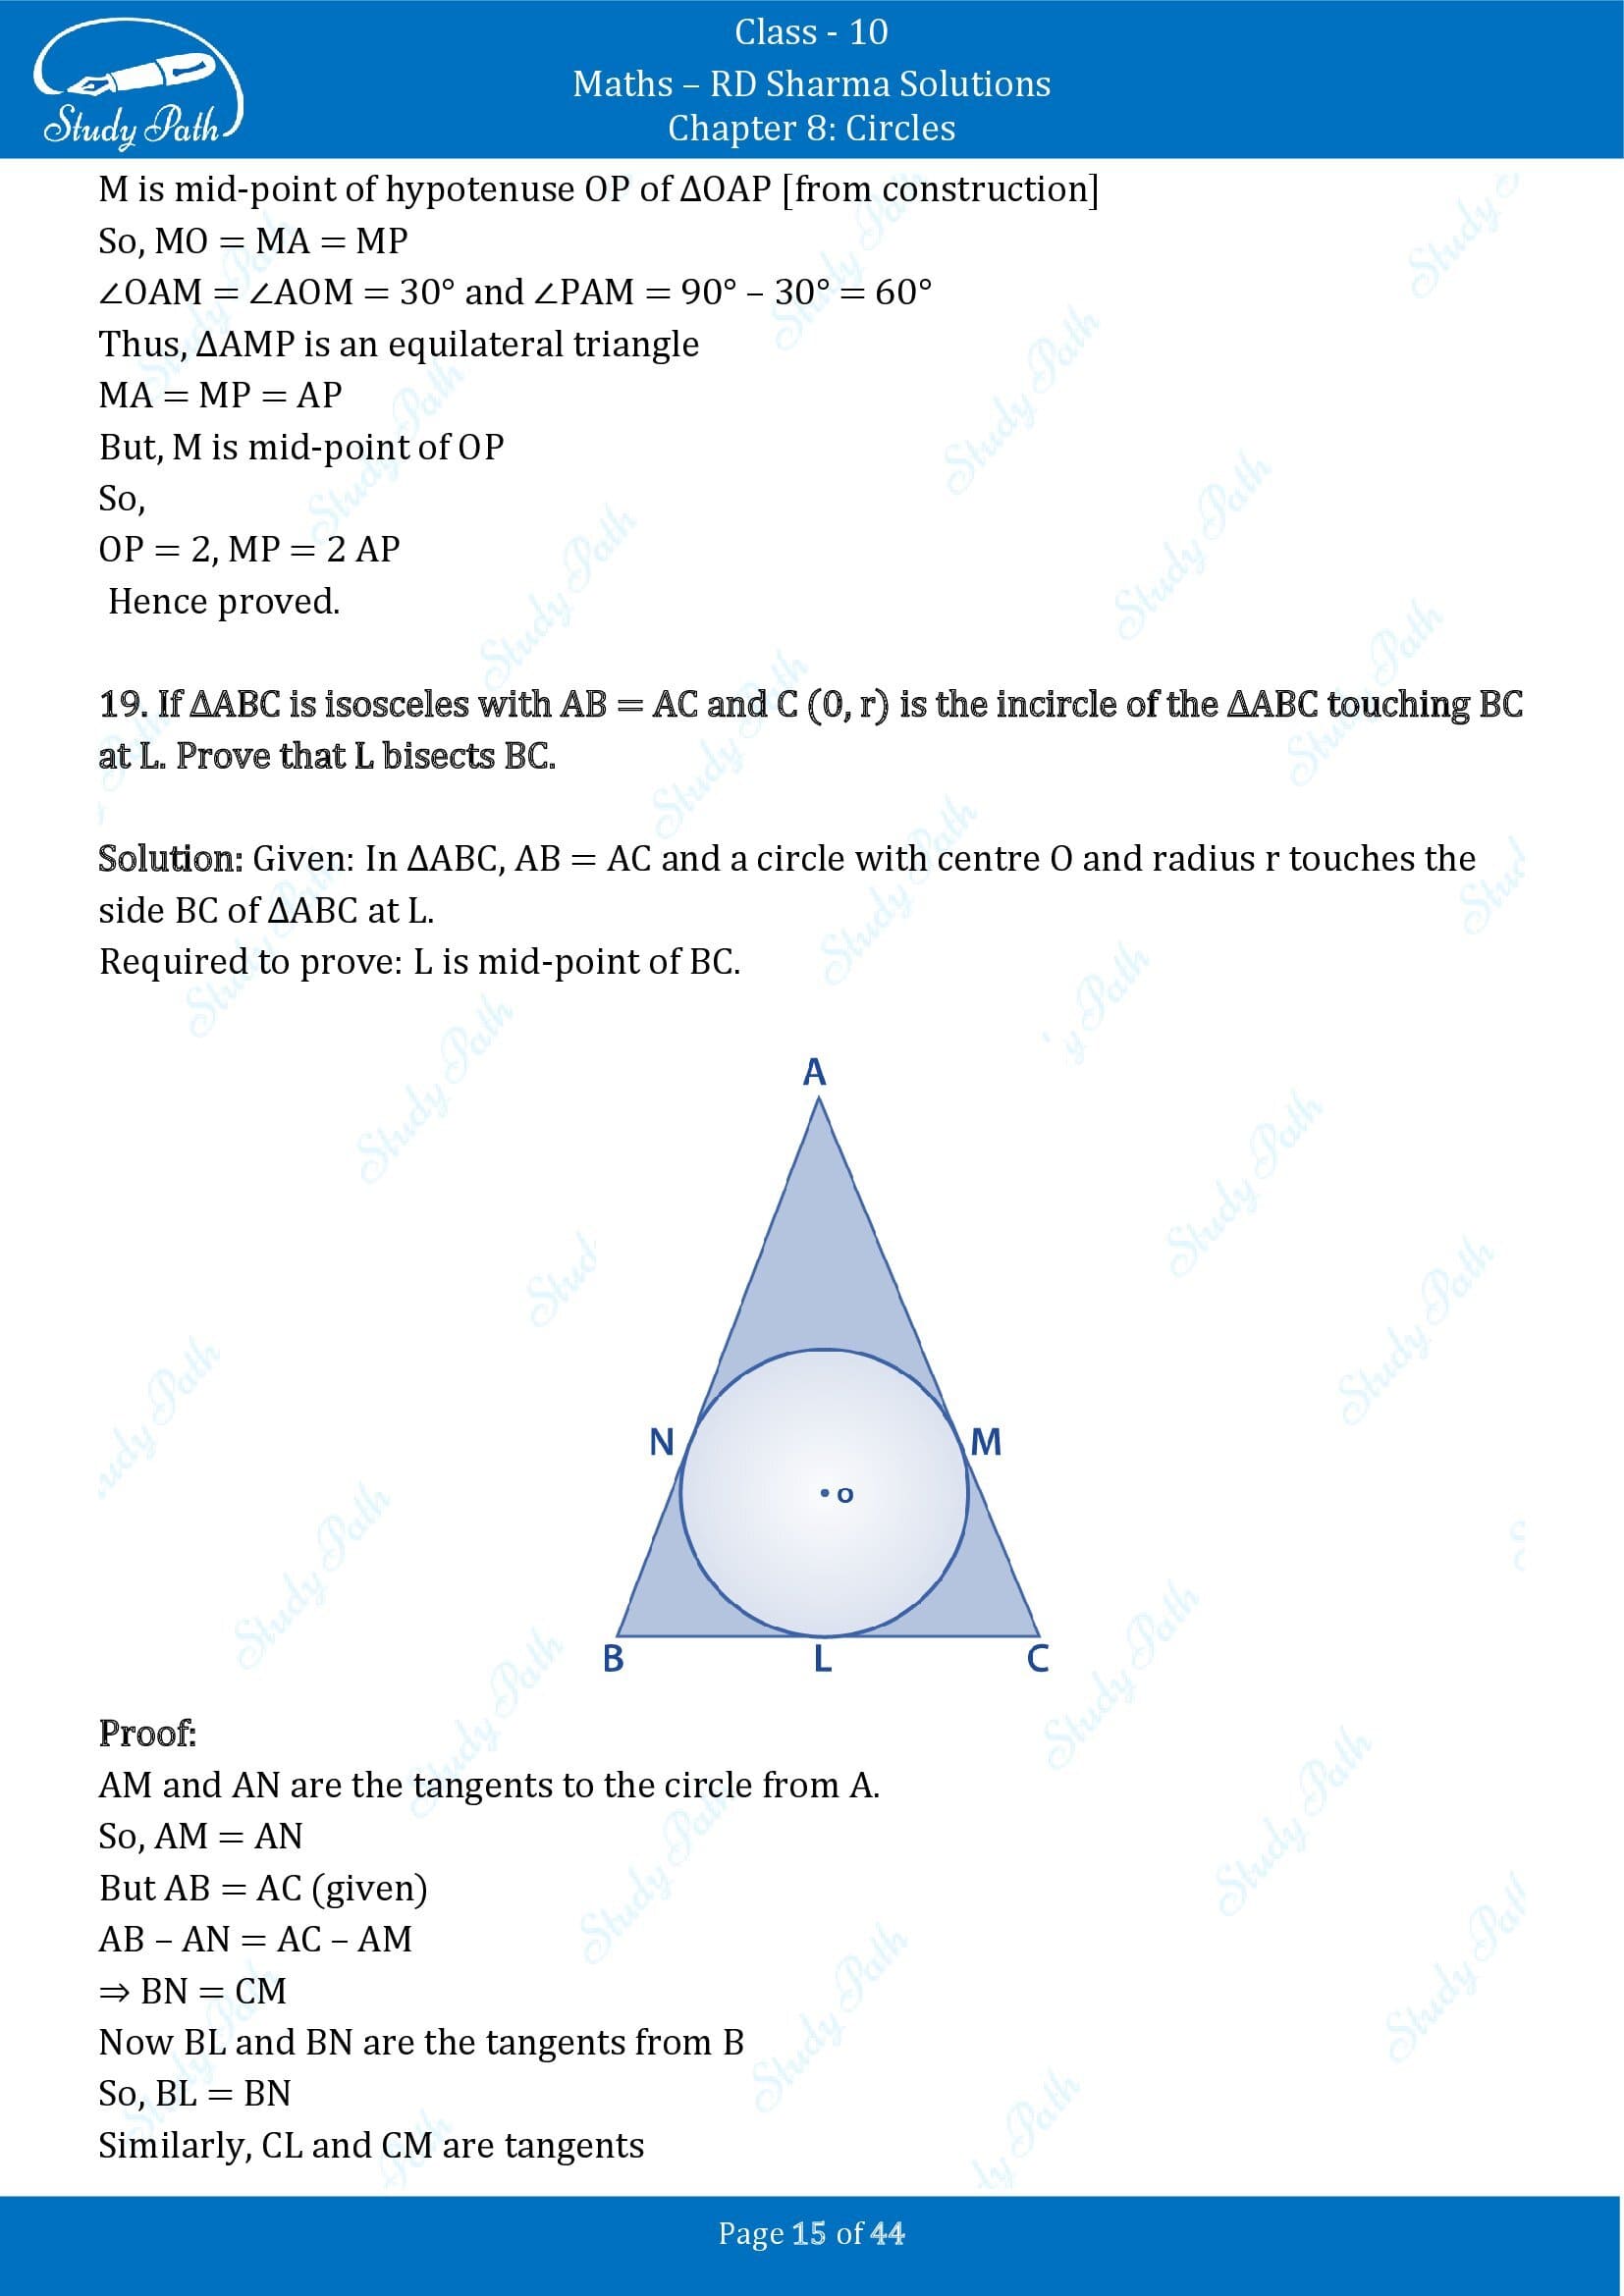 RD Sharma Solutions Class 10 Chapter 8 Circles Exercise 8.2 00015